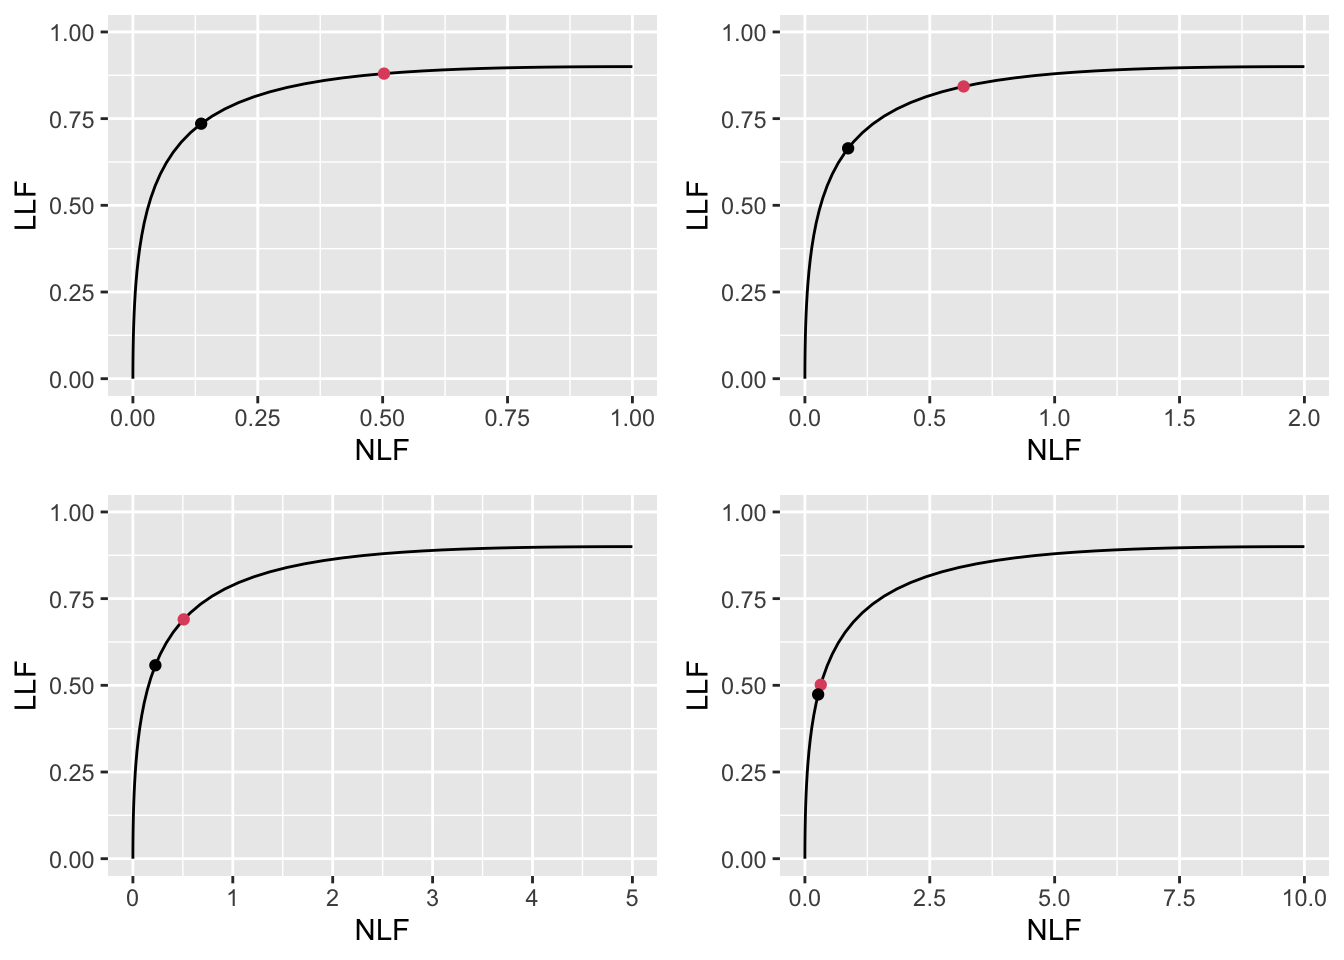 FROC plots with superimposed operating points for varying $\lambda$. The red dot corresponds to $\text{wAFROC}_\text{AUC}$ optimization and the black dot to Youden-index optimization.